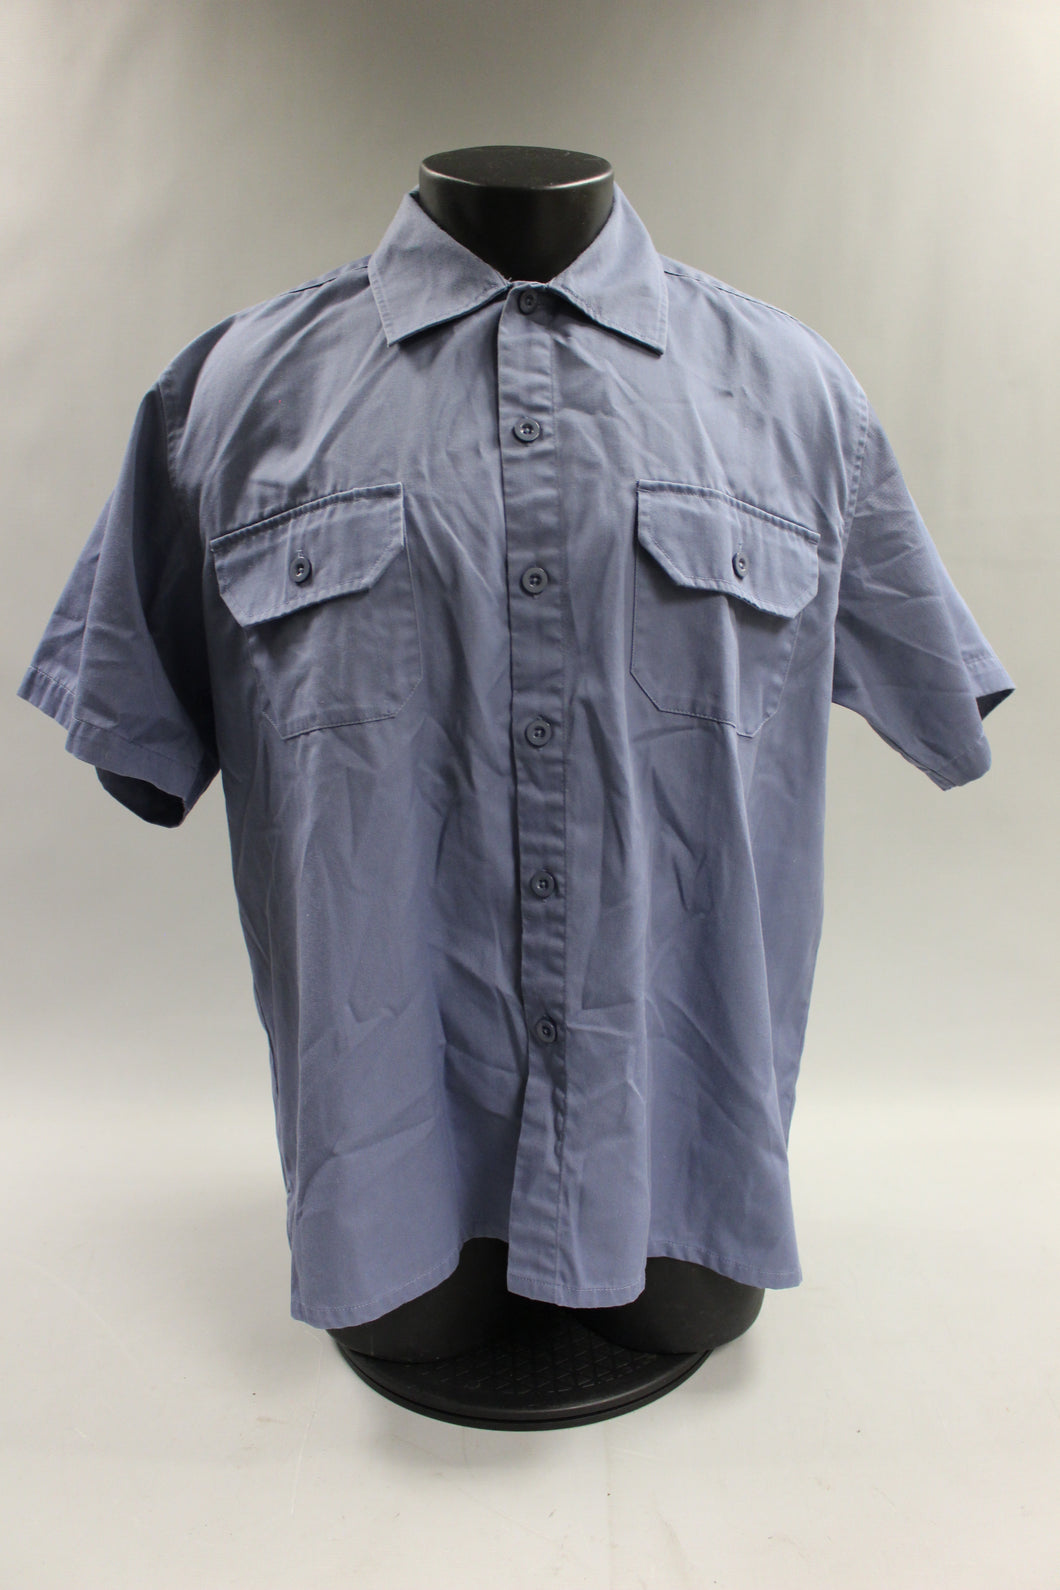 Work Ethic By Haband Men's Button Up Work Shirt Size L -Blue -Used